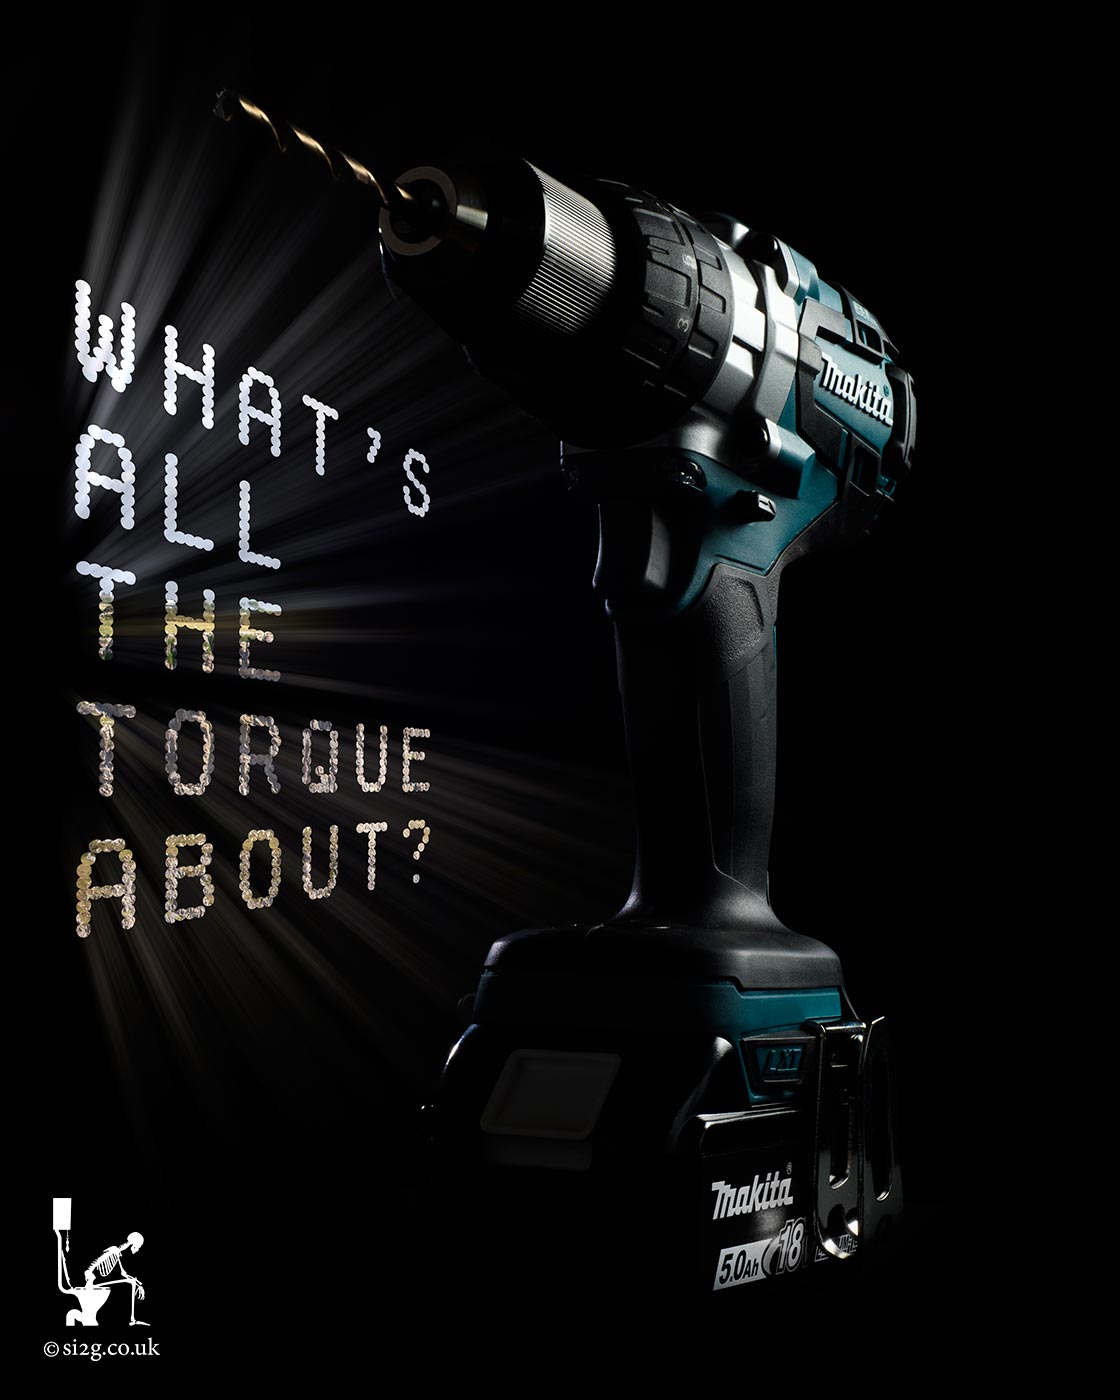 Whats All The Torque? - Photograph and copy for a review article.  The concept was to photograph the drill, make it look modern and design the text in some way to tie it together.  We decided upon using text that looks like holes drilled into the backdrop.  We back-light the photograph to make it look like it was illuminated be the light spilling in through the text.